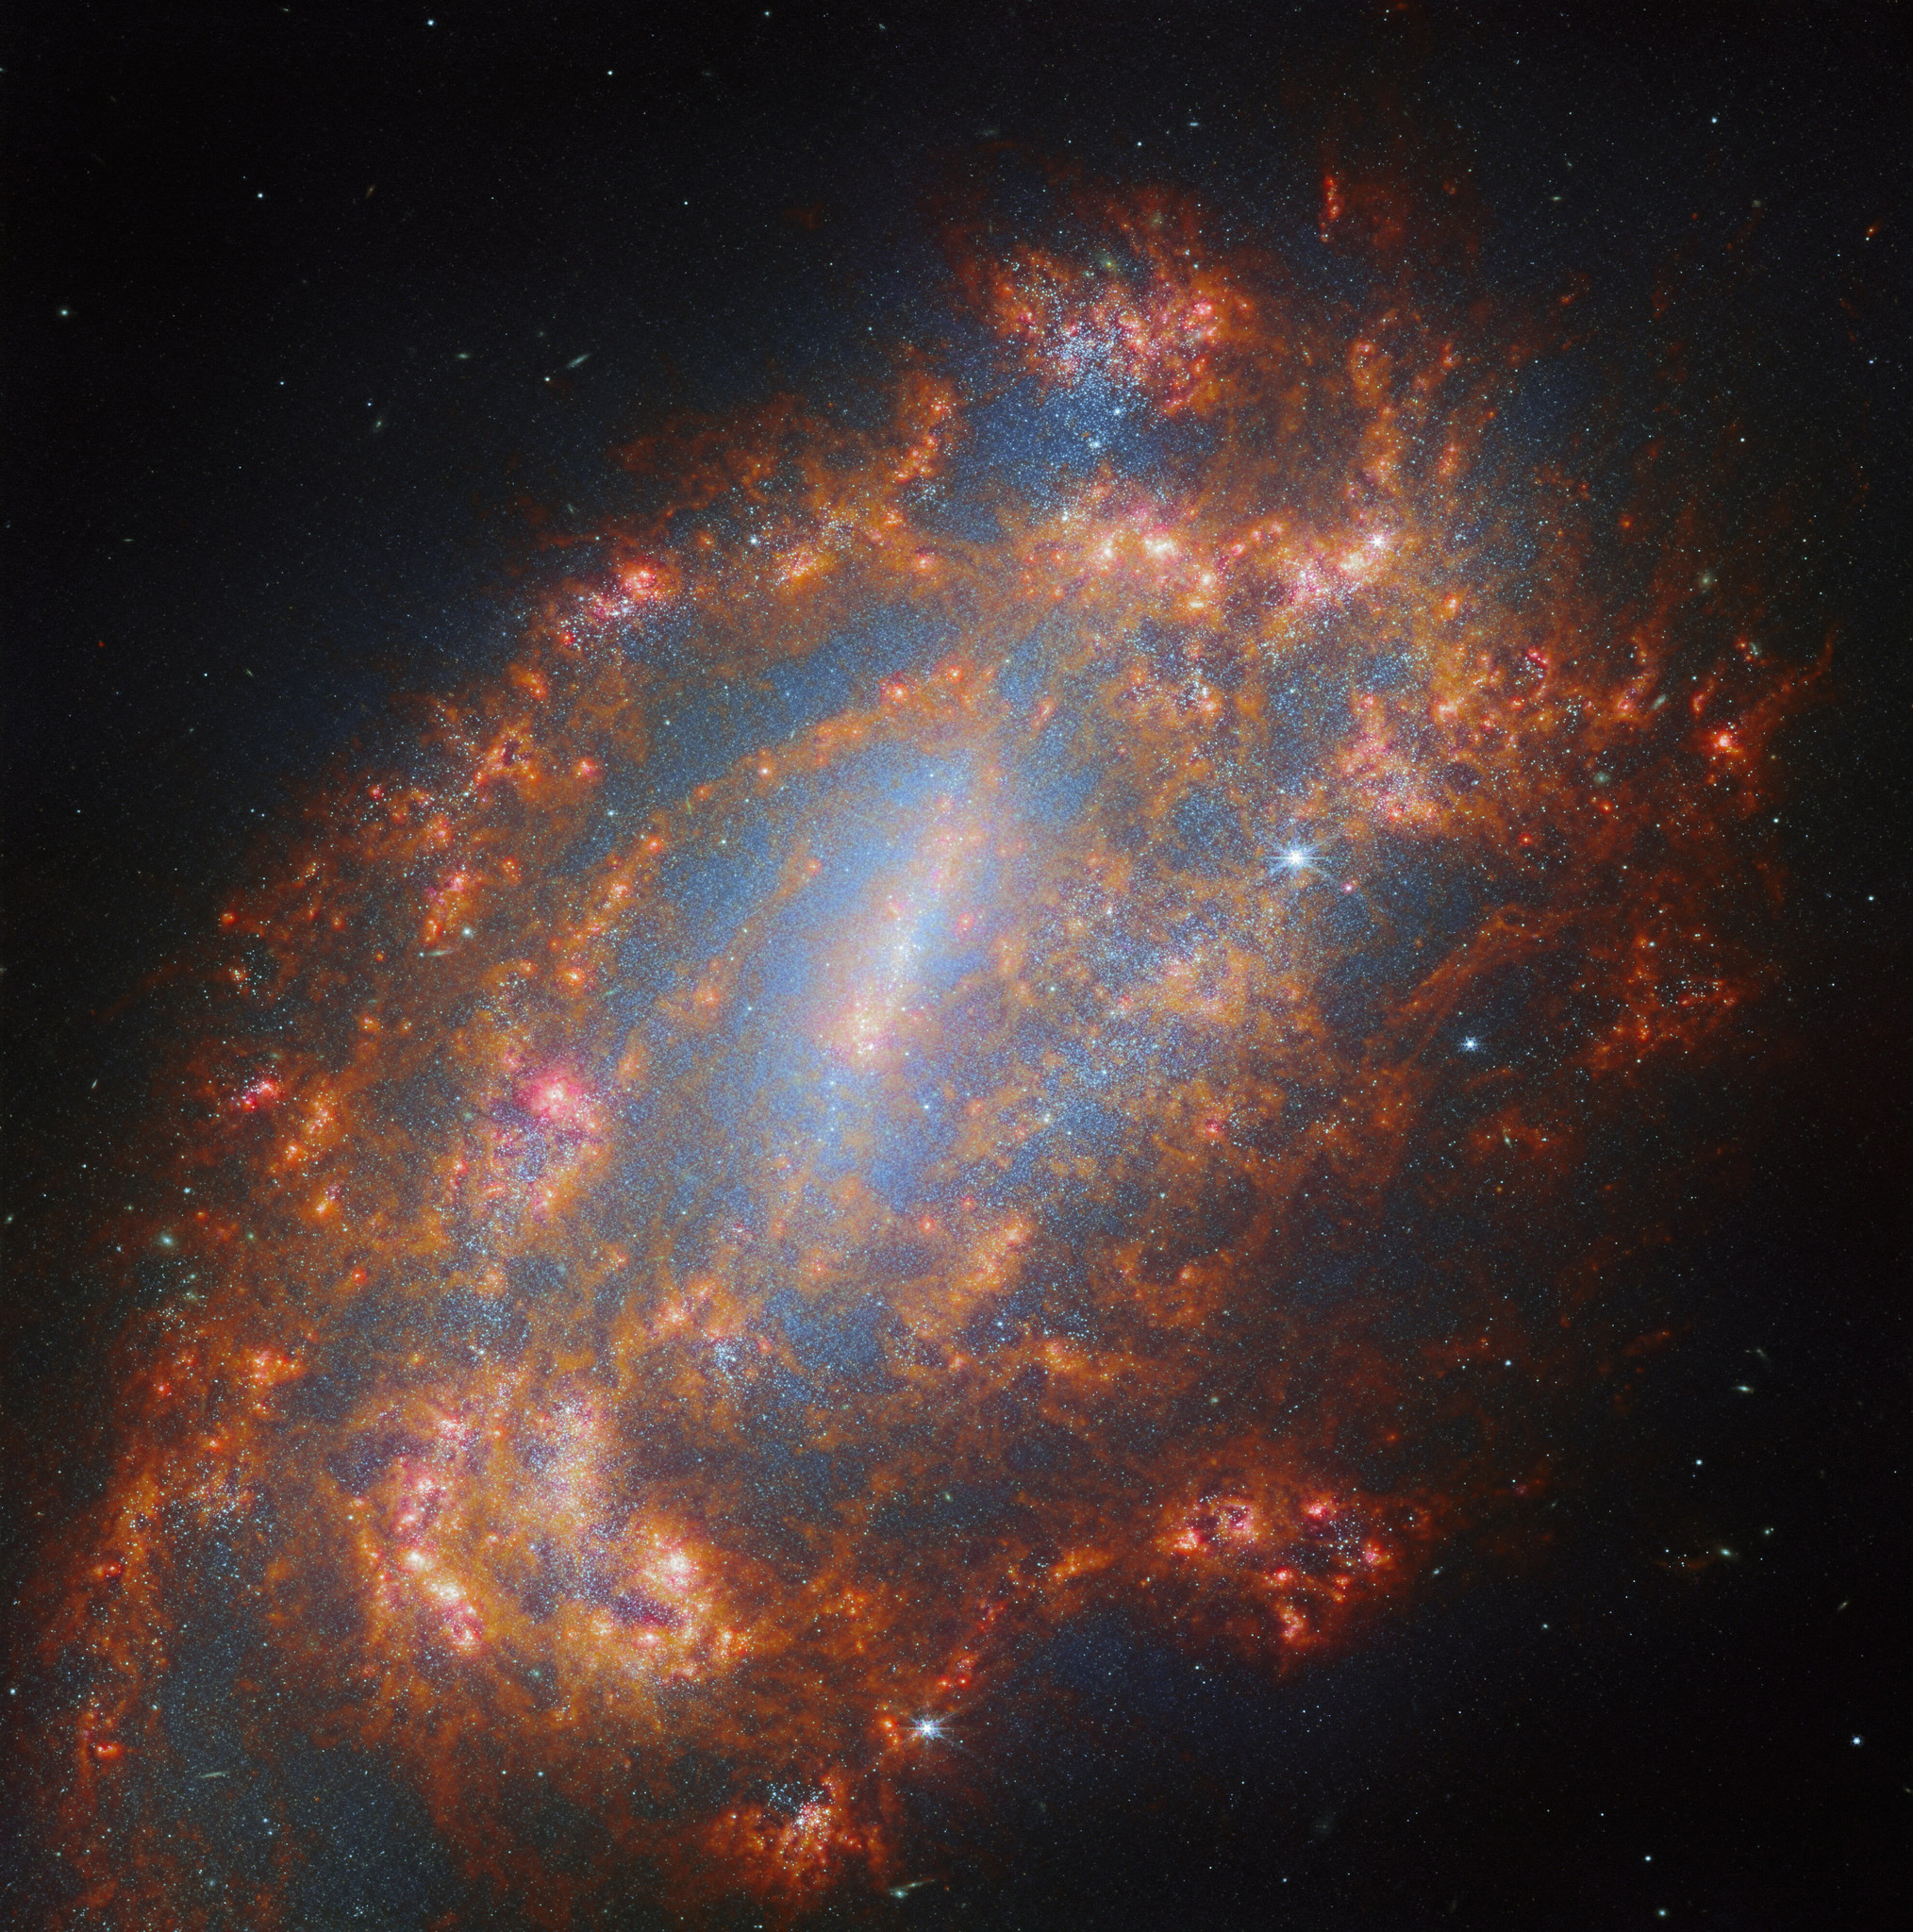 A barred spiral galaxy on a dark, nearly empty background. The whole galaxy glows with a pale blue light, particularly along the galaxy’s bar which runs from top to bottom through the galactic core. It’s speckled with tiny stars. The center is surrounded by rich clouds of hot gas and dust along the arms. The coral-colored arms are loosely wound and a bit ragged, and contain a few star-forming regions that shine brightly